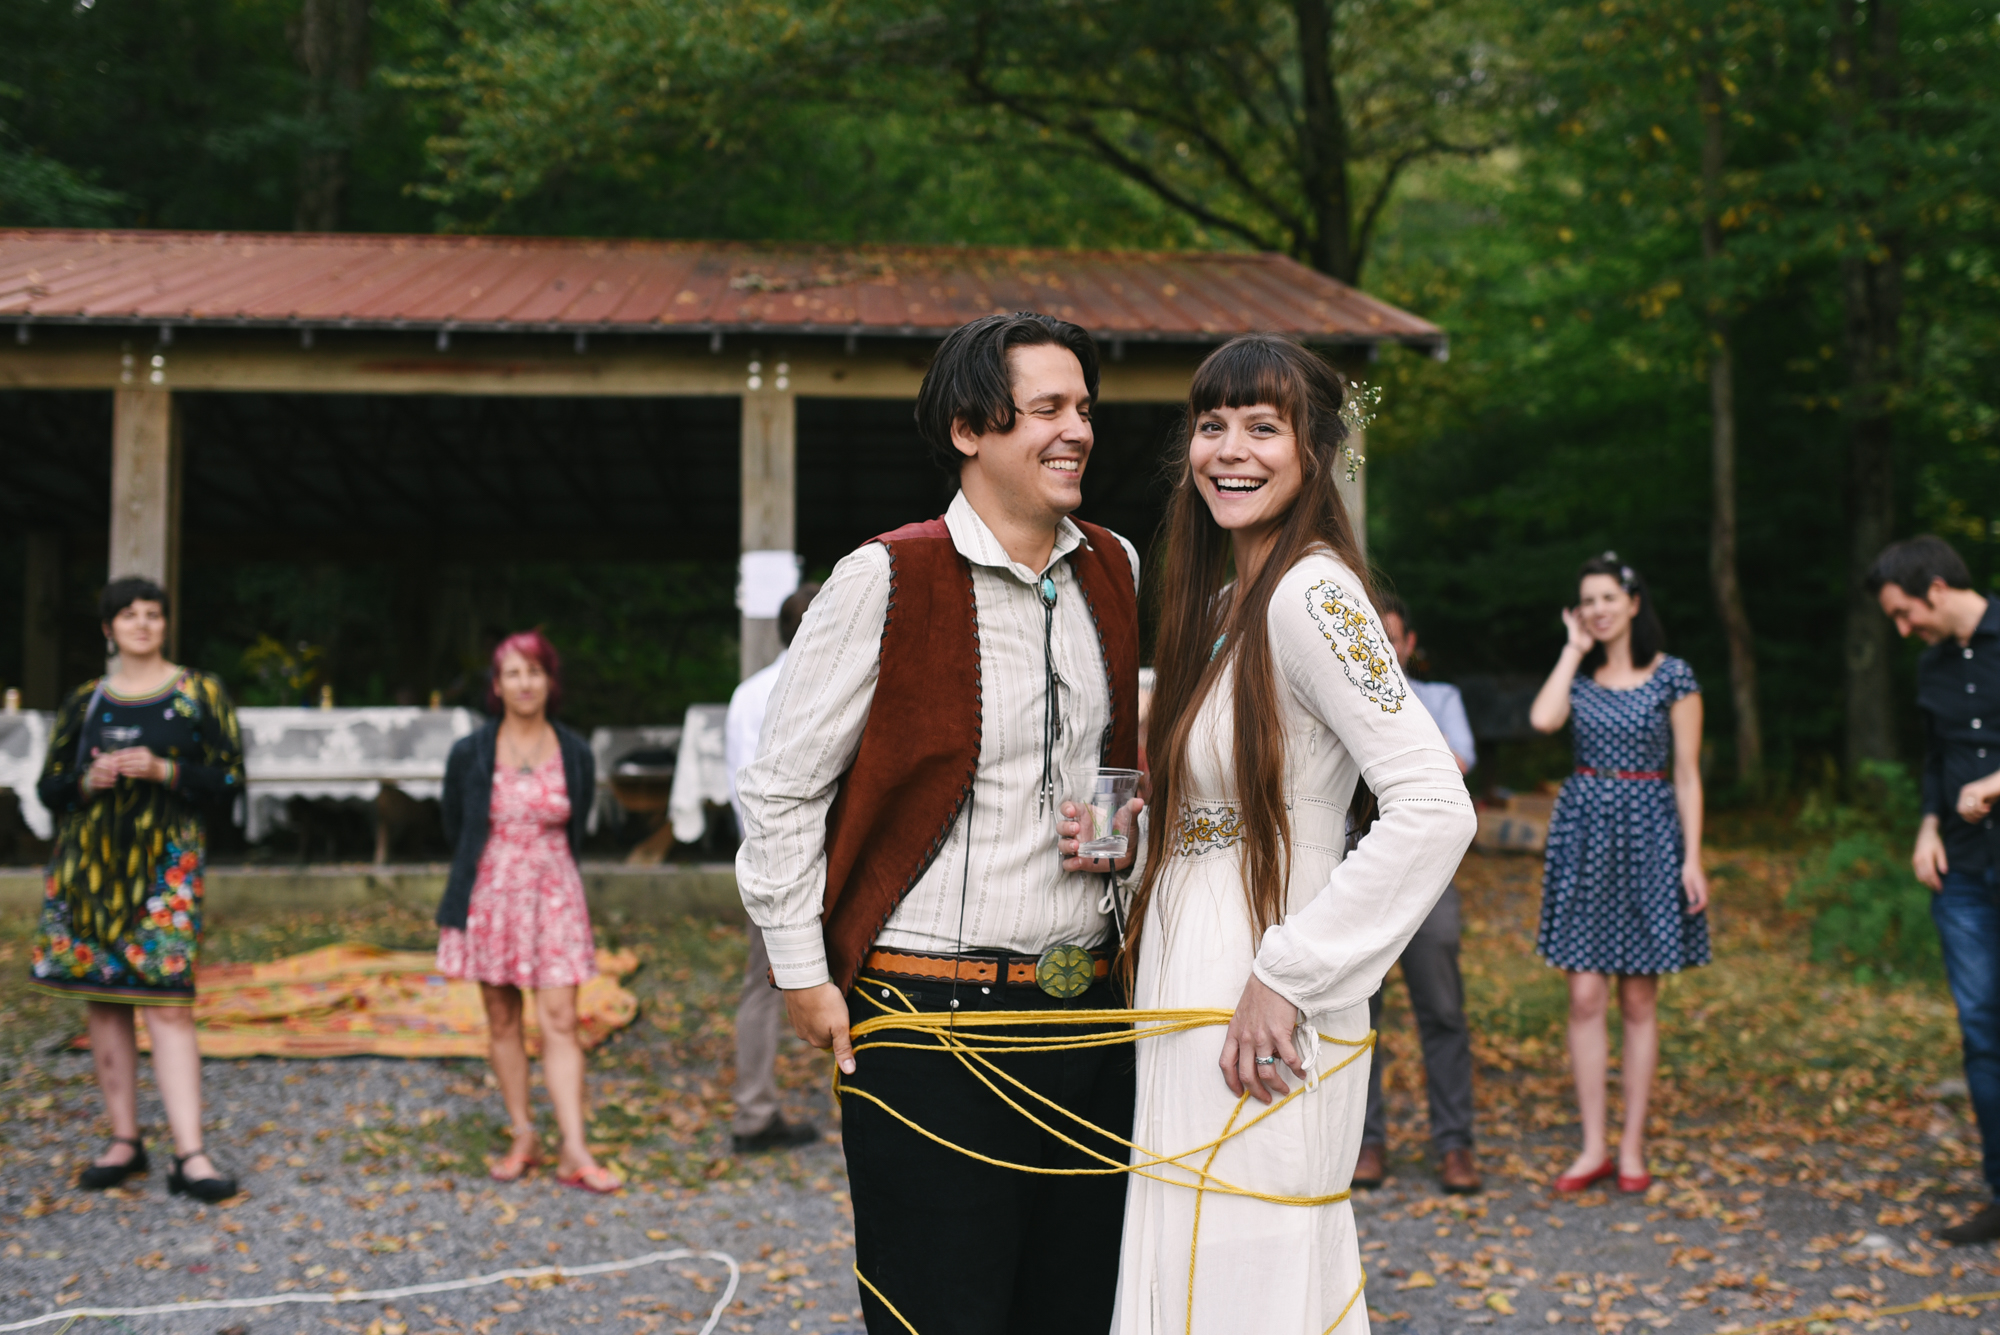  Mountain Wedding, Outdoors, Rustic, West Virginia, Maryland Wedding Photographer, DIY, Casual, bride and groom tied together with yarn, laughing and smiling together 